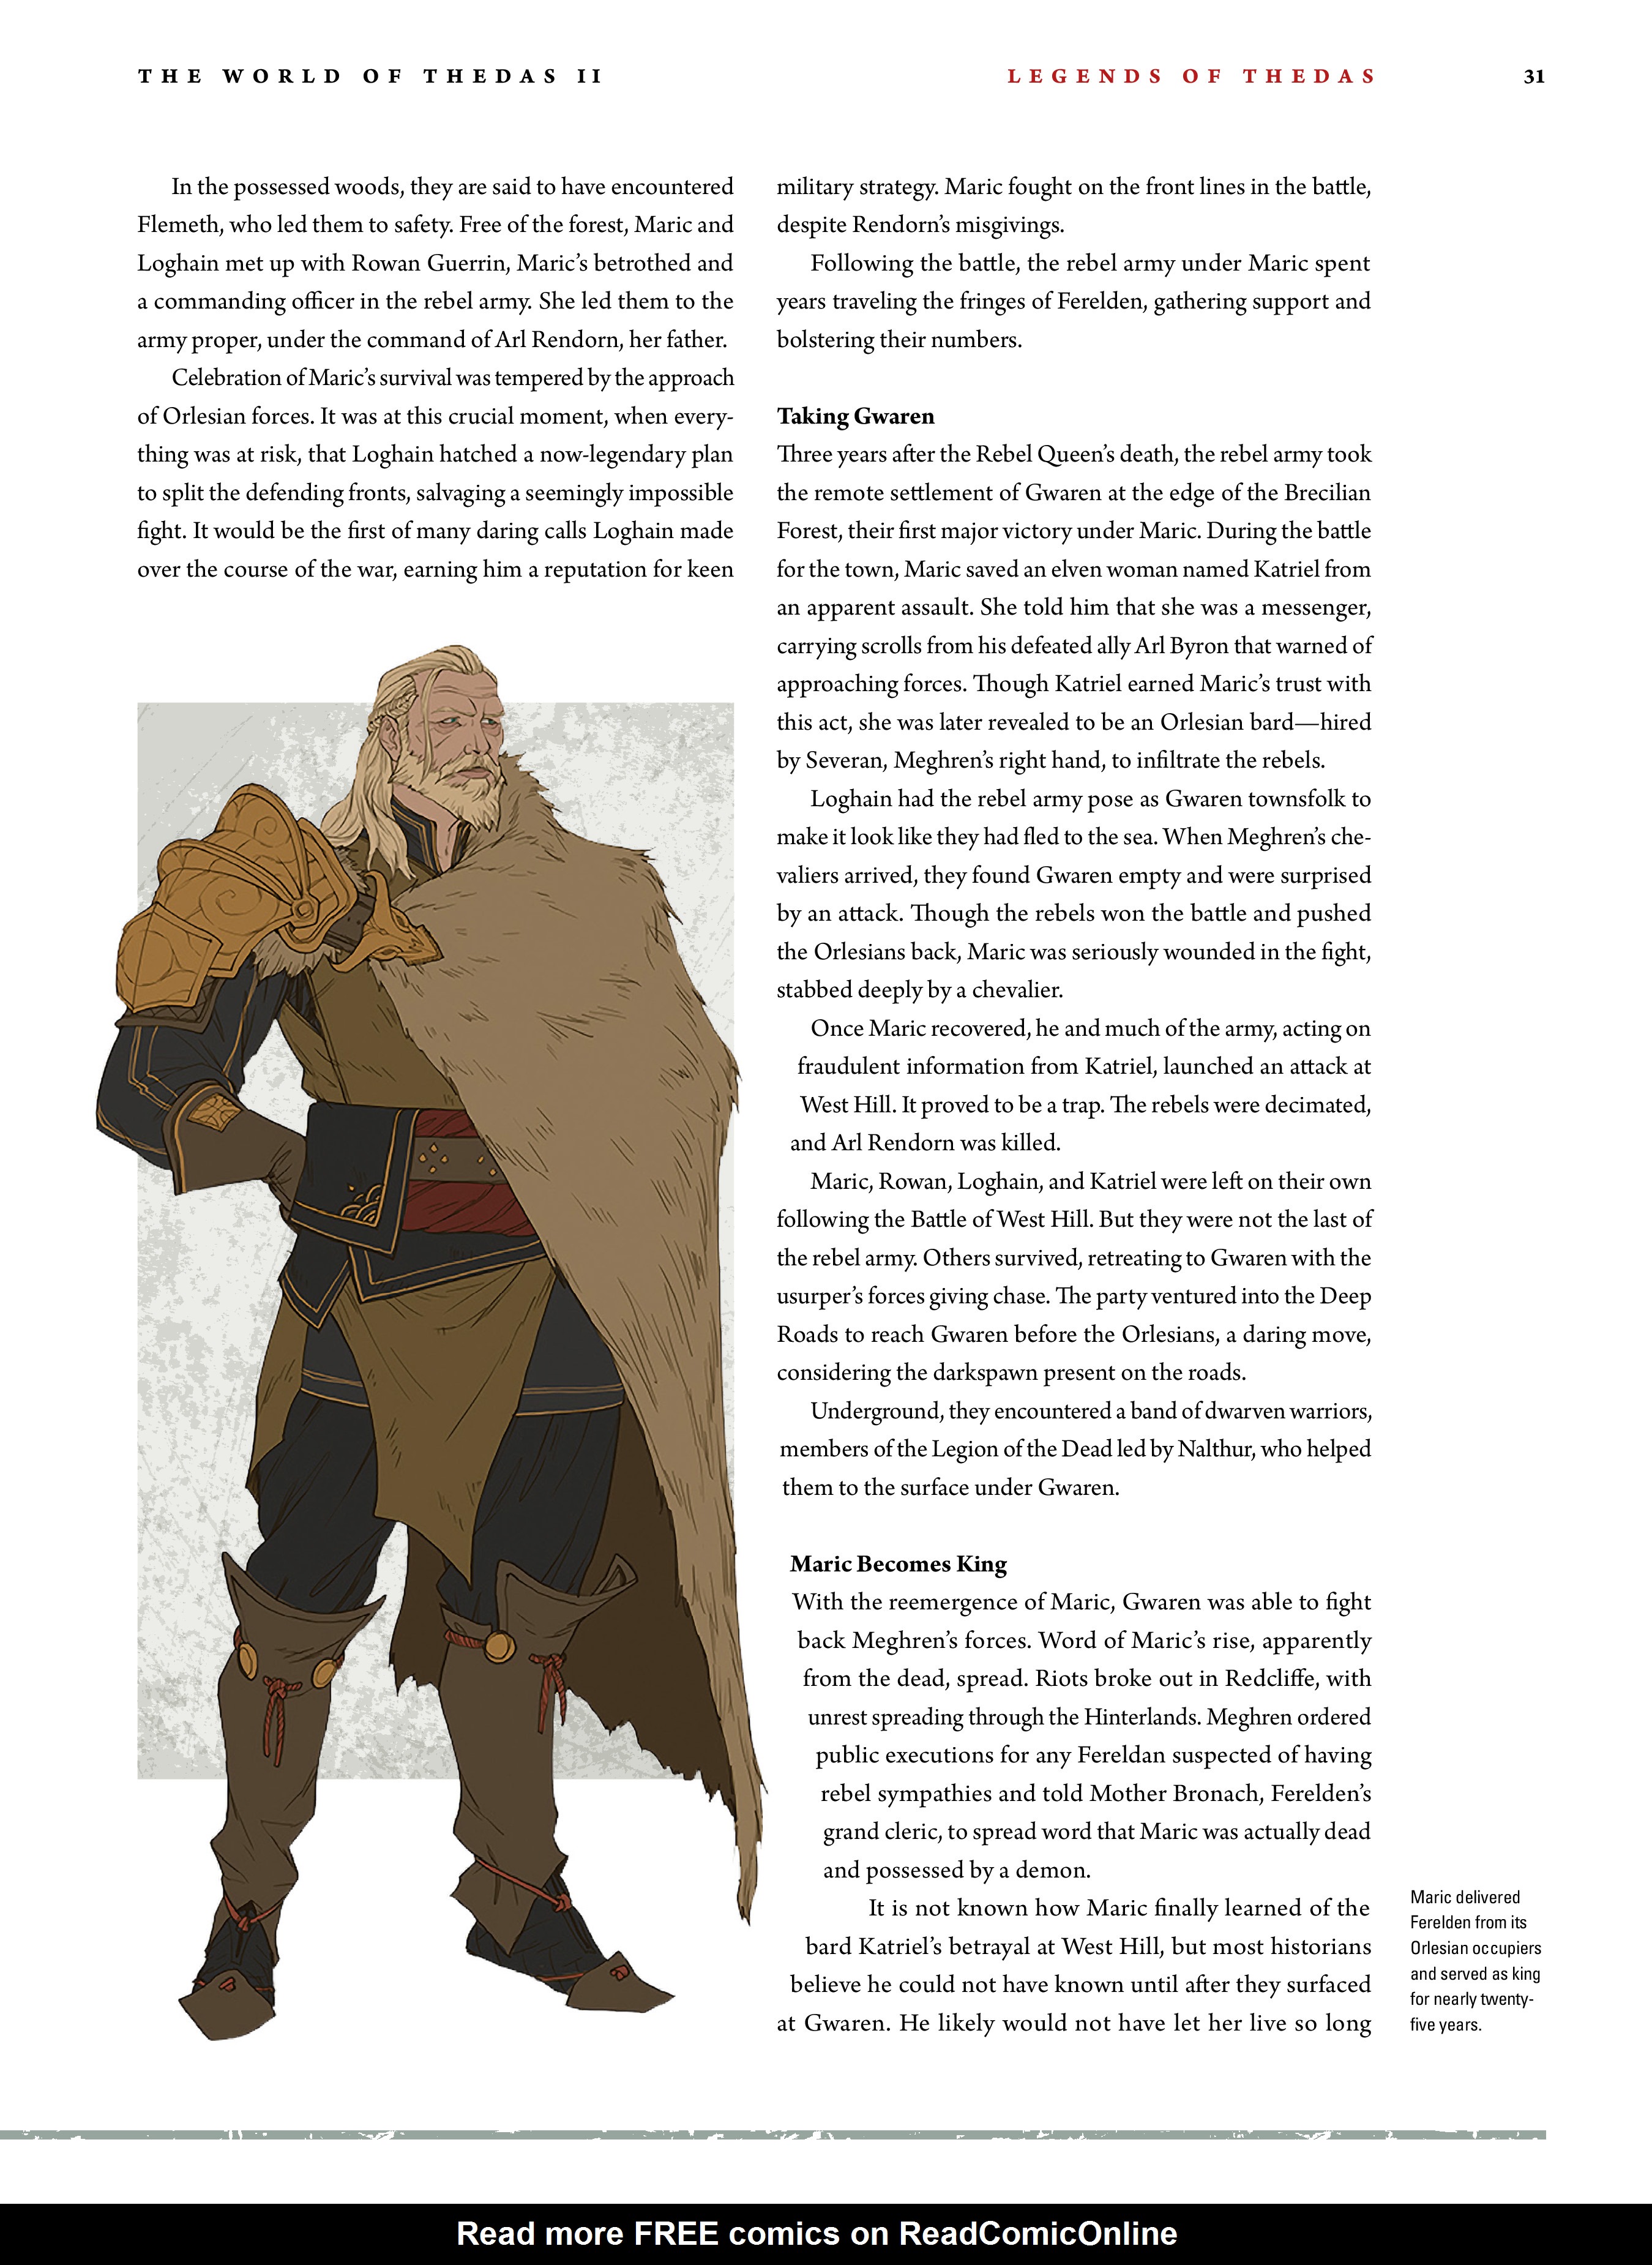 Read online Dragon Age: The World of Thedas comic -  Issue # TPB 2 - 28